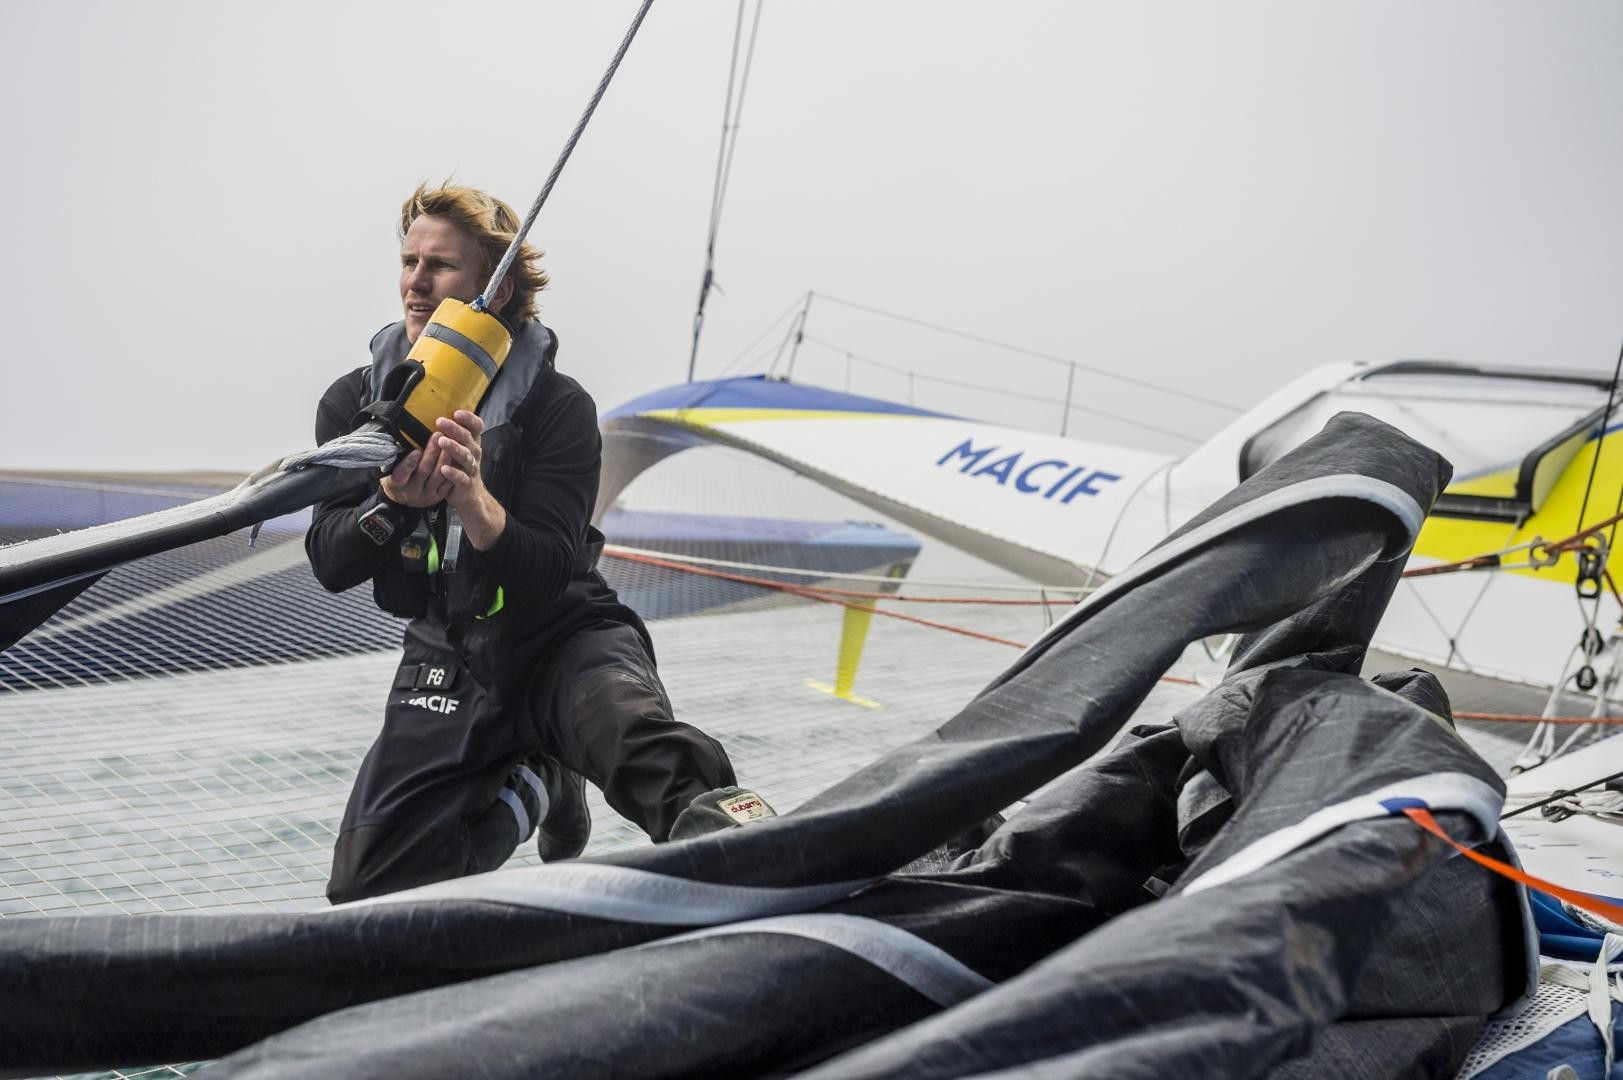 François Gabart beats the record for the distance sailed single-handed in 24 hours